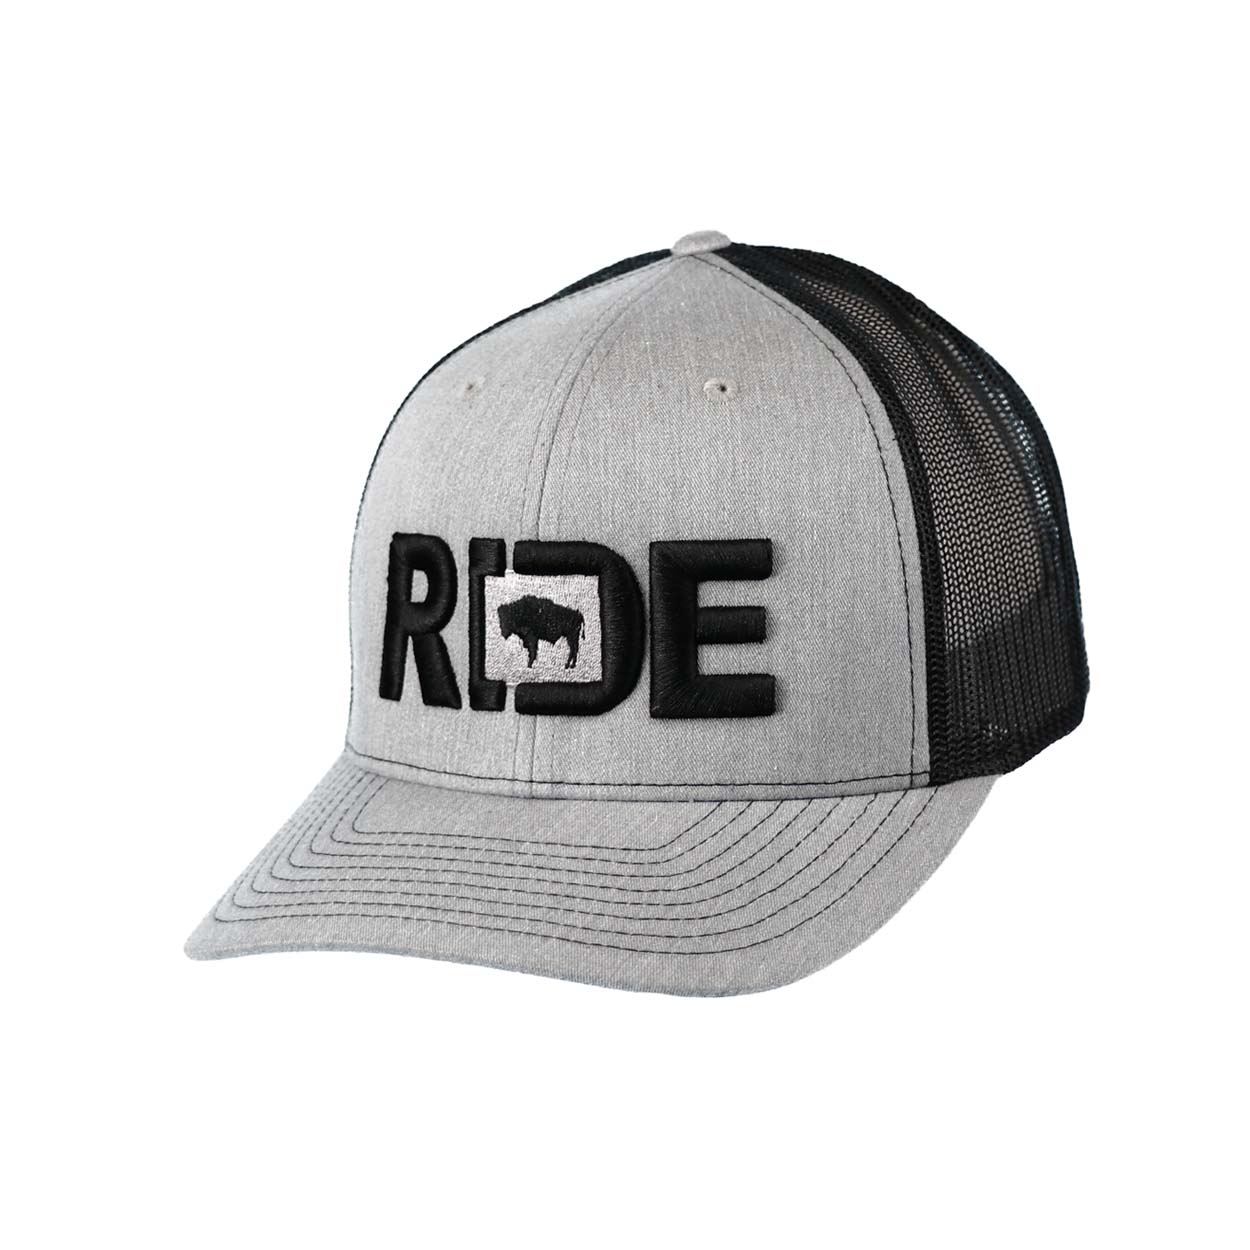 Ride Wyoming Classic Pro 3D Puff Embroidered Snapback Trucker Hat Heather Gray/Black